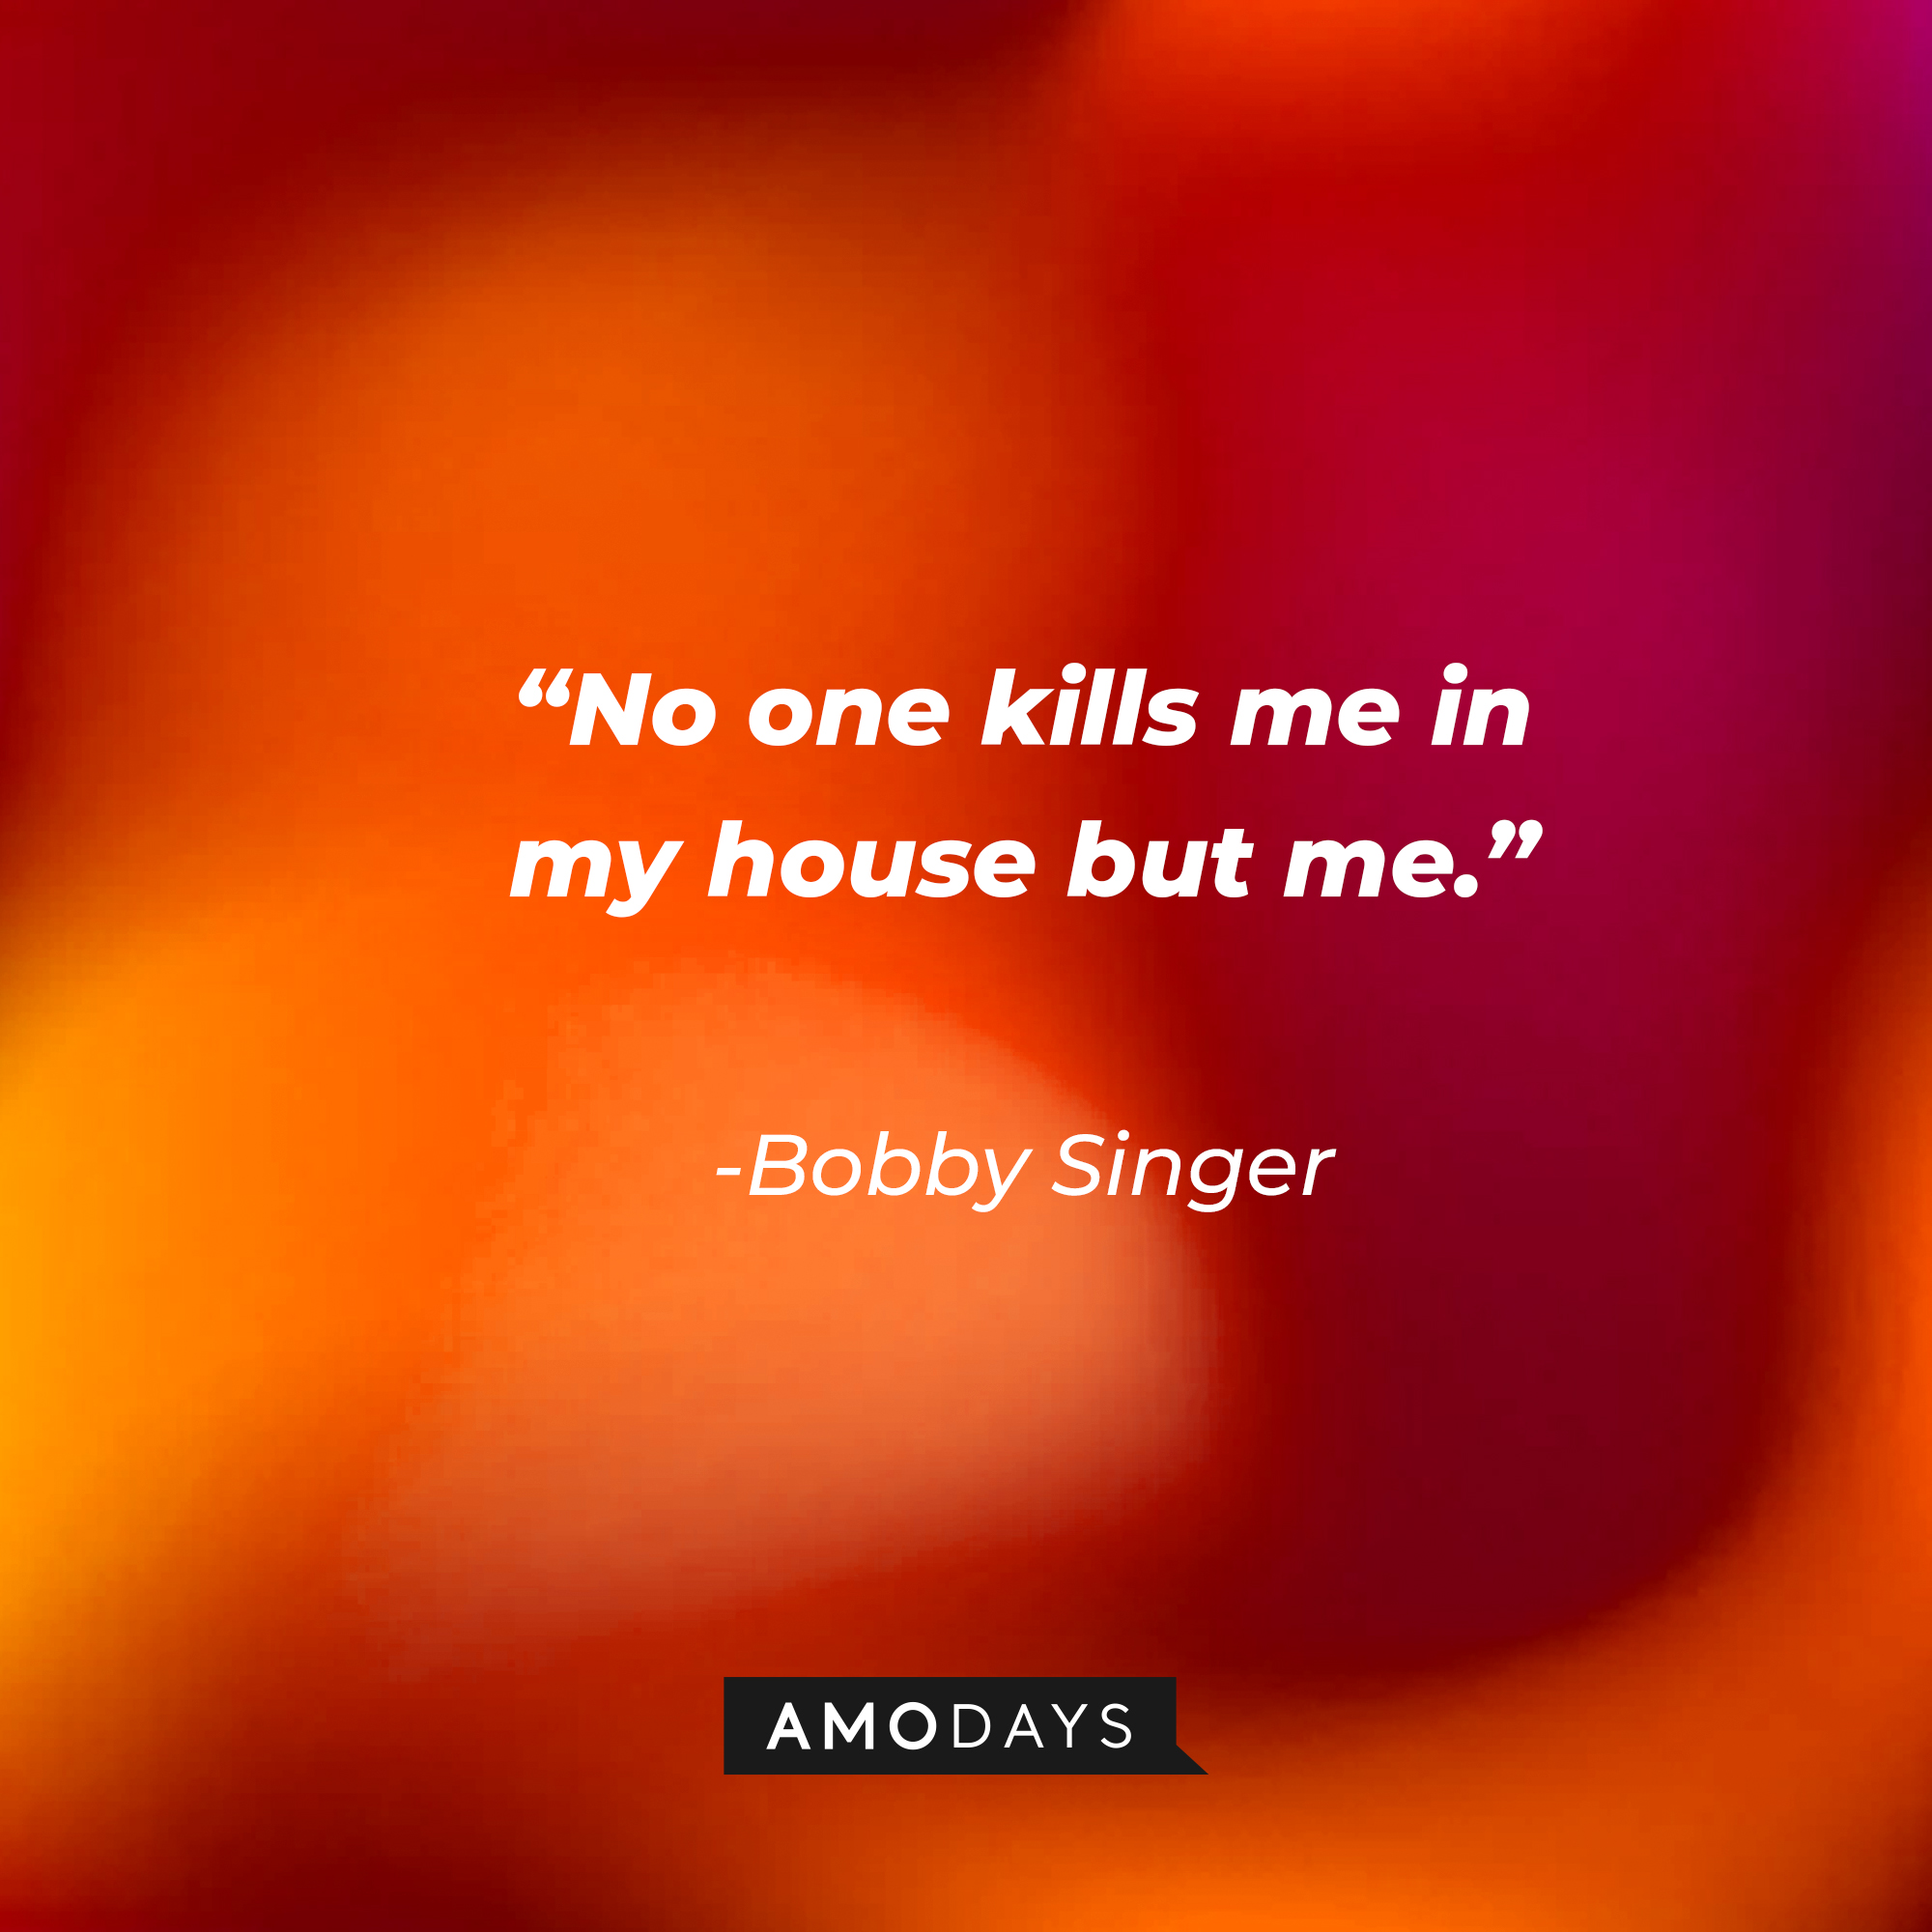 Bobby Singer's quote: "No one kills me in my house but me." | Source: Amodays